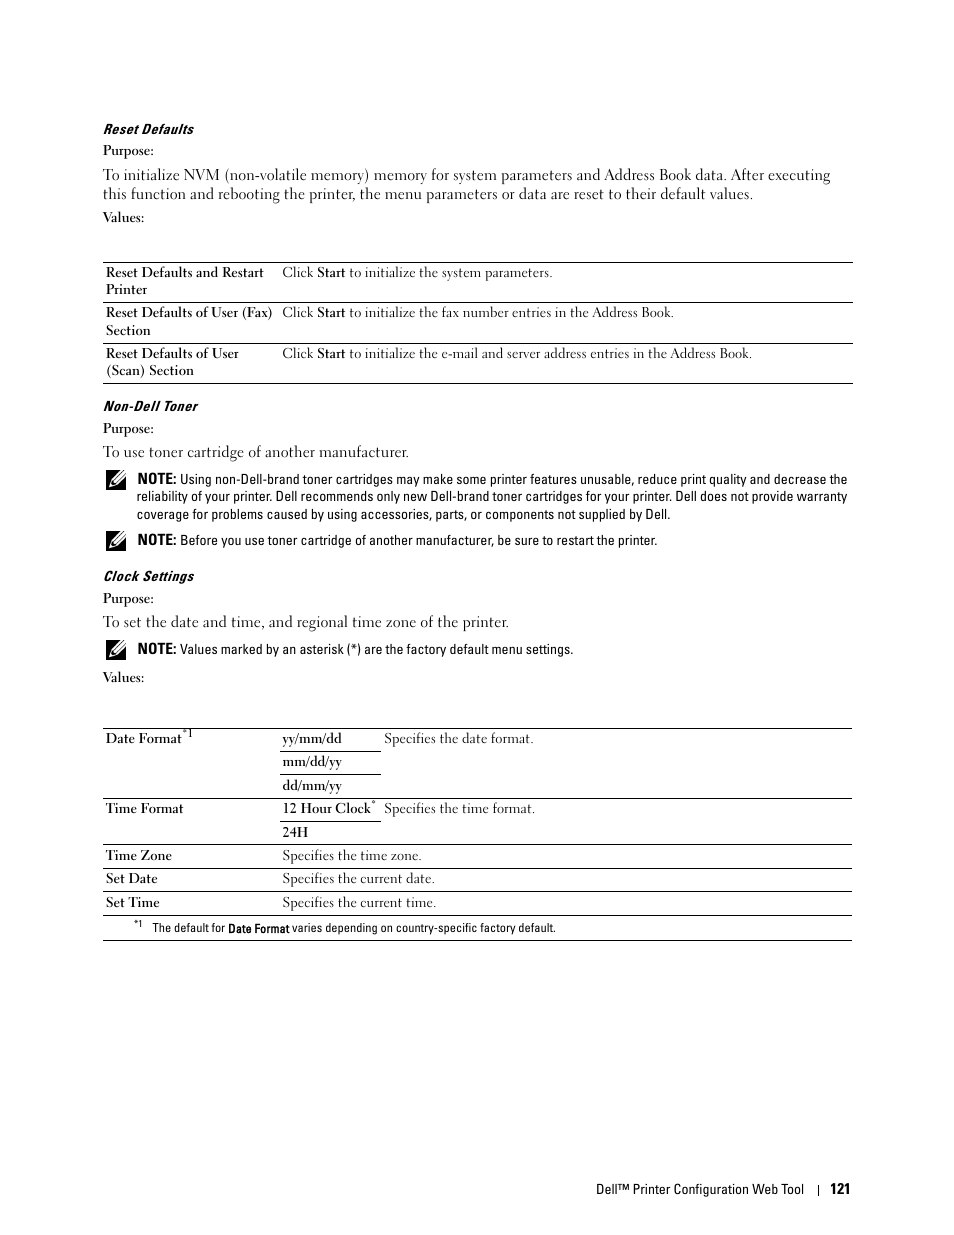 Reset defaults" "non-dell toner" "clock settings | Dell C1765NFW MFP Laser  Printer User Manual | Page 123 / 382